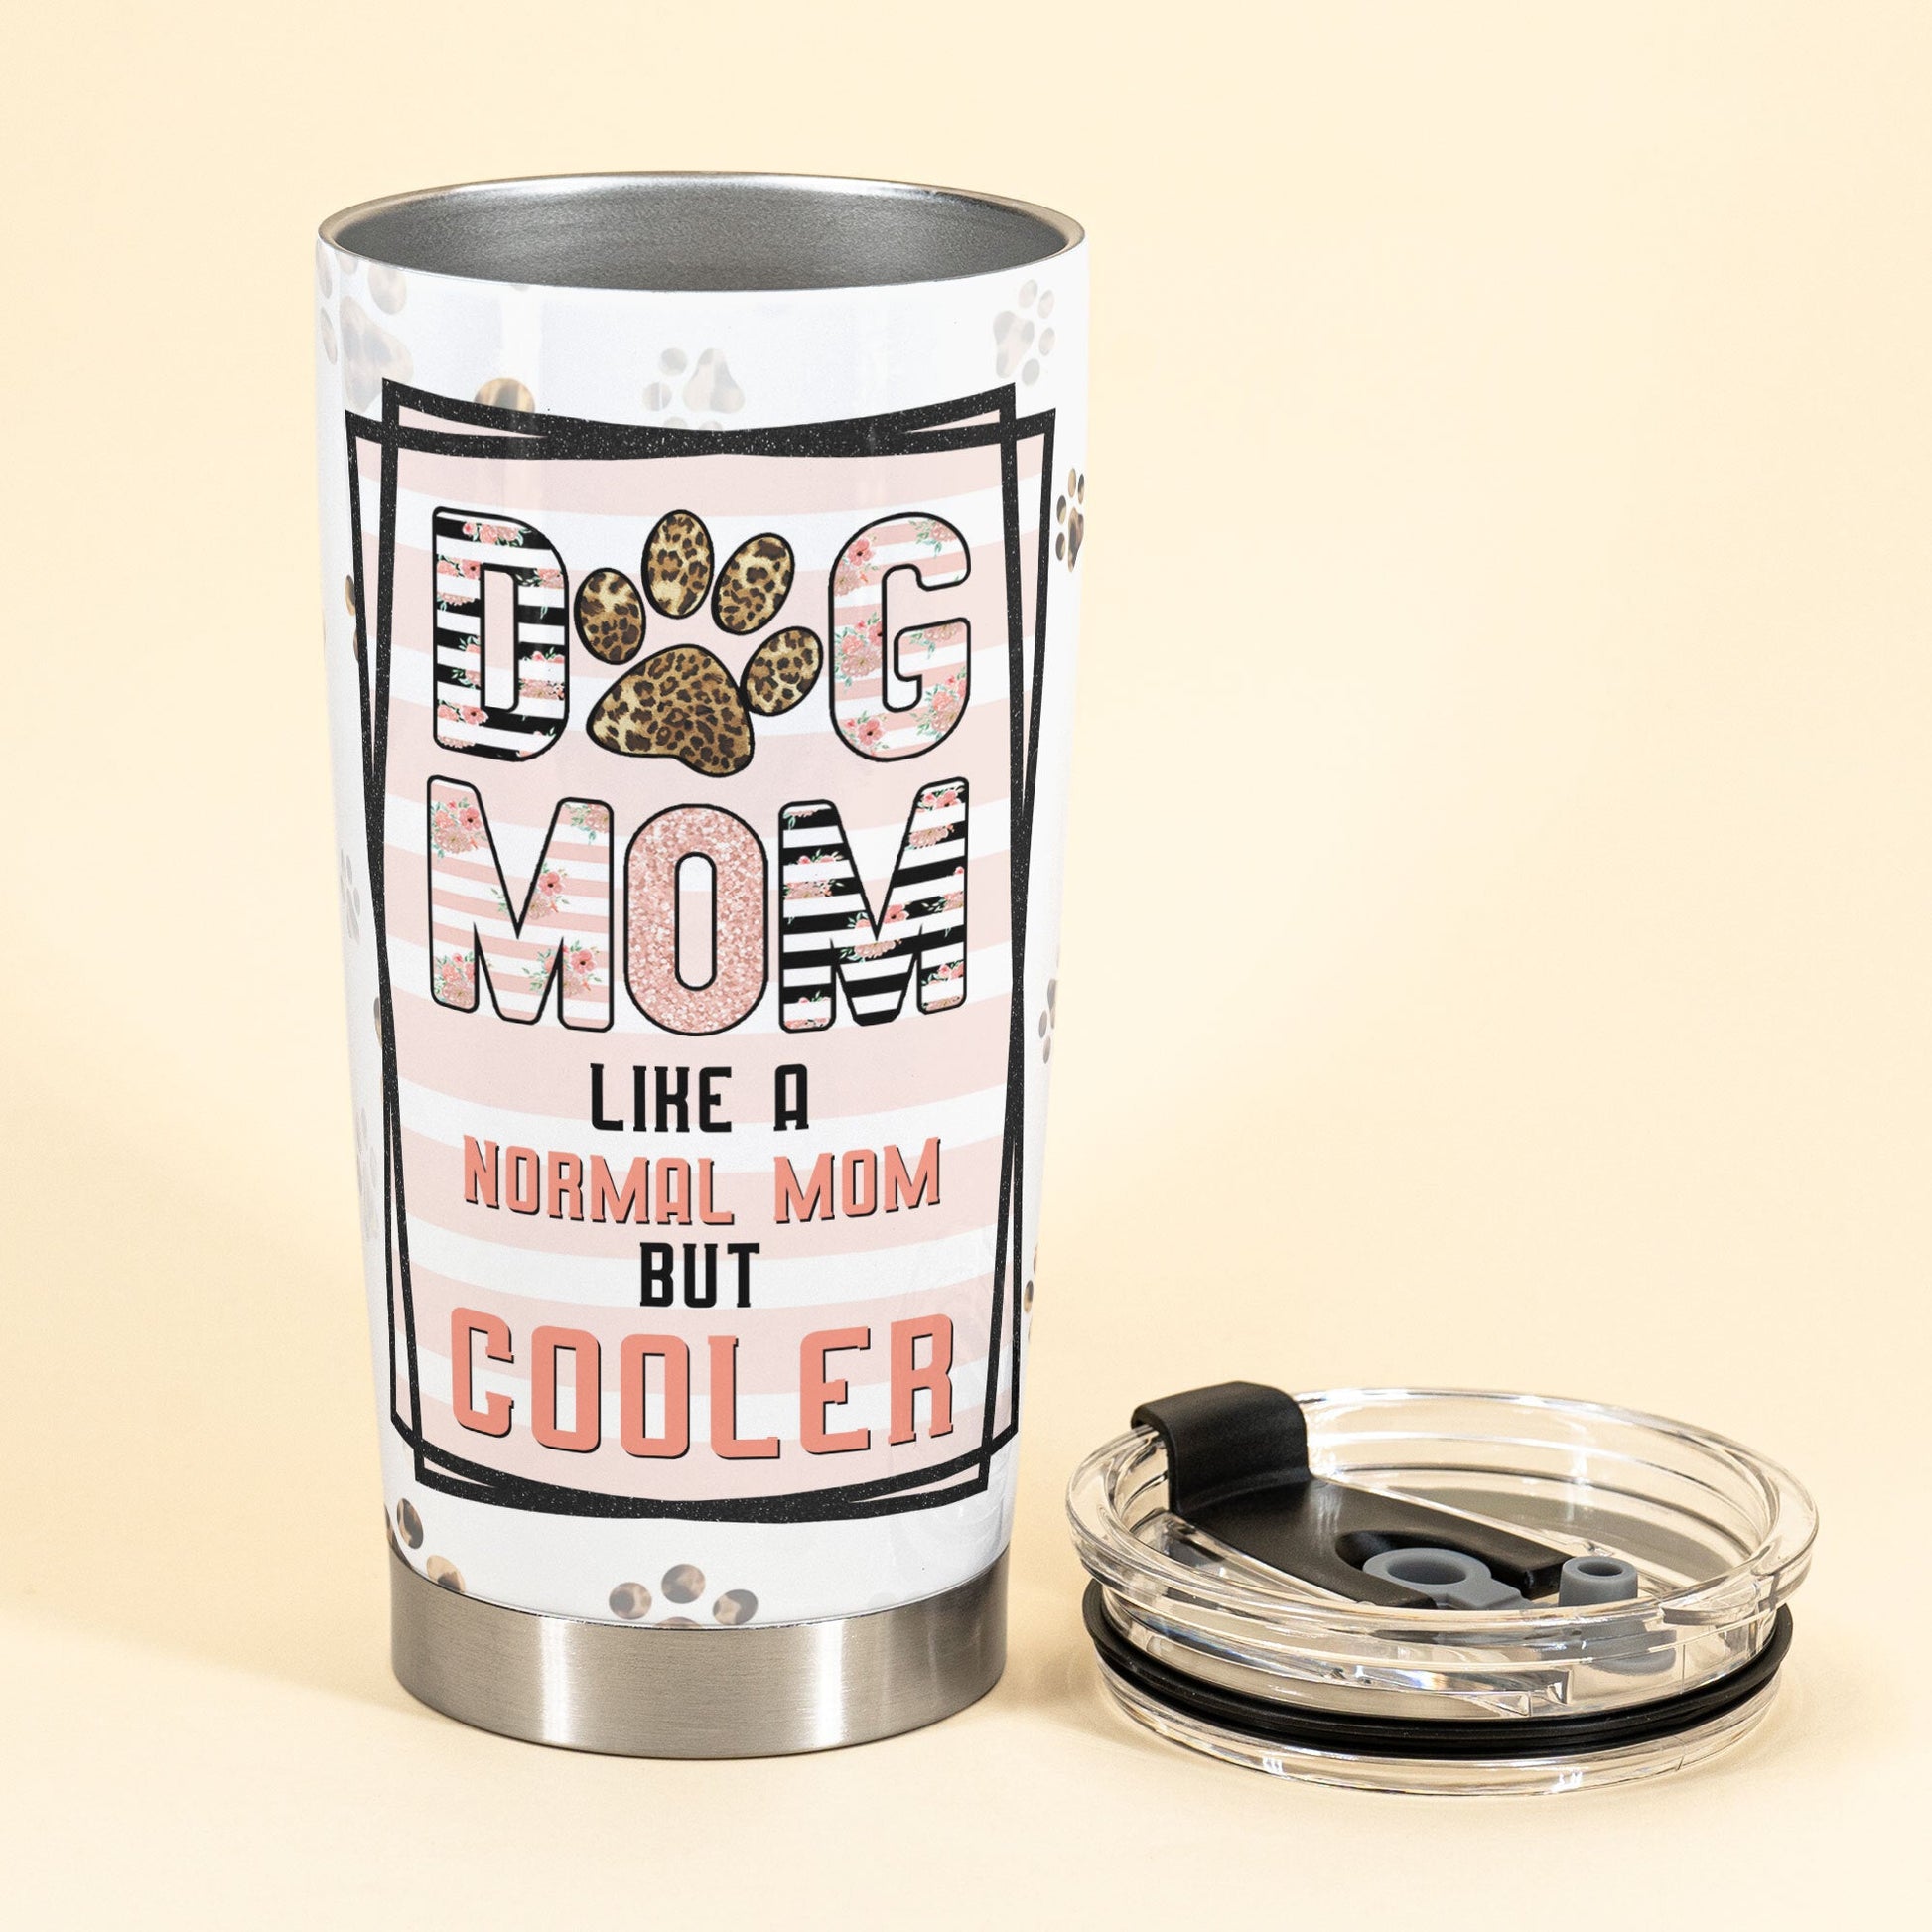 Best Dog Mom Ever - Personalized Gifts Custom Dog Tumbler for Dog Mom, —  GearLit